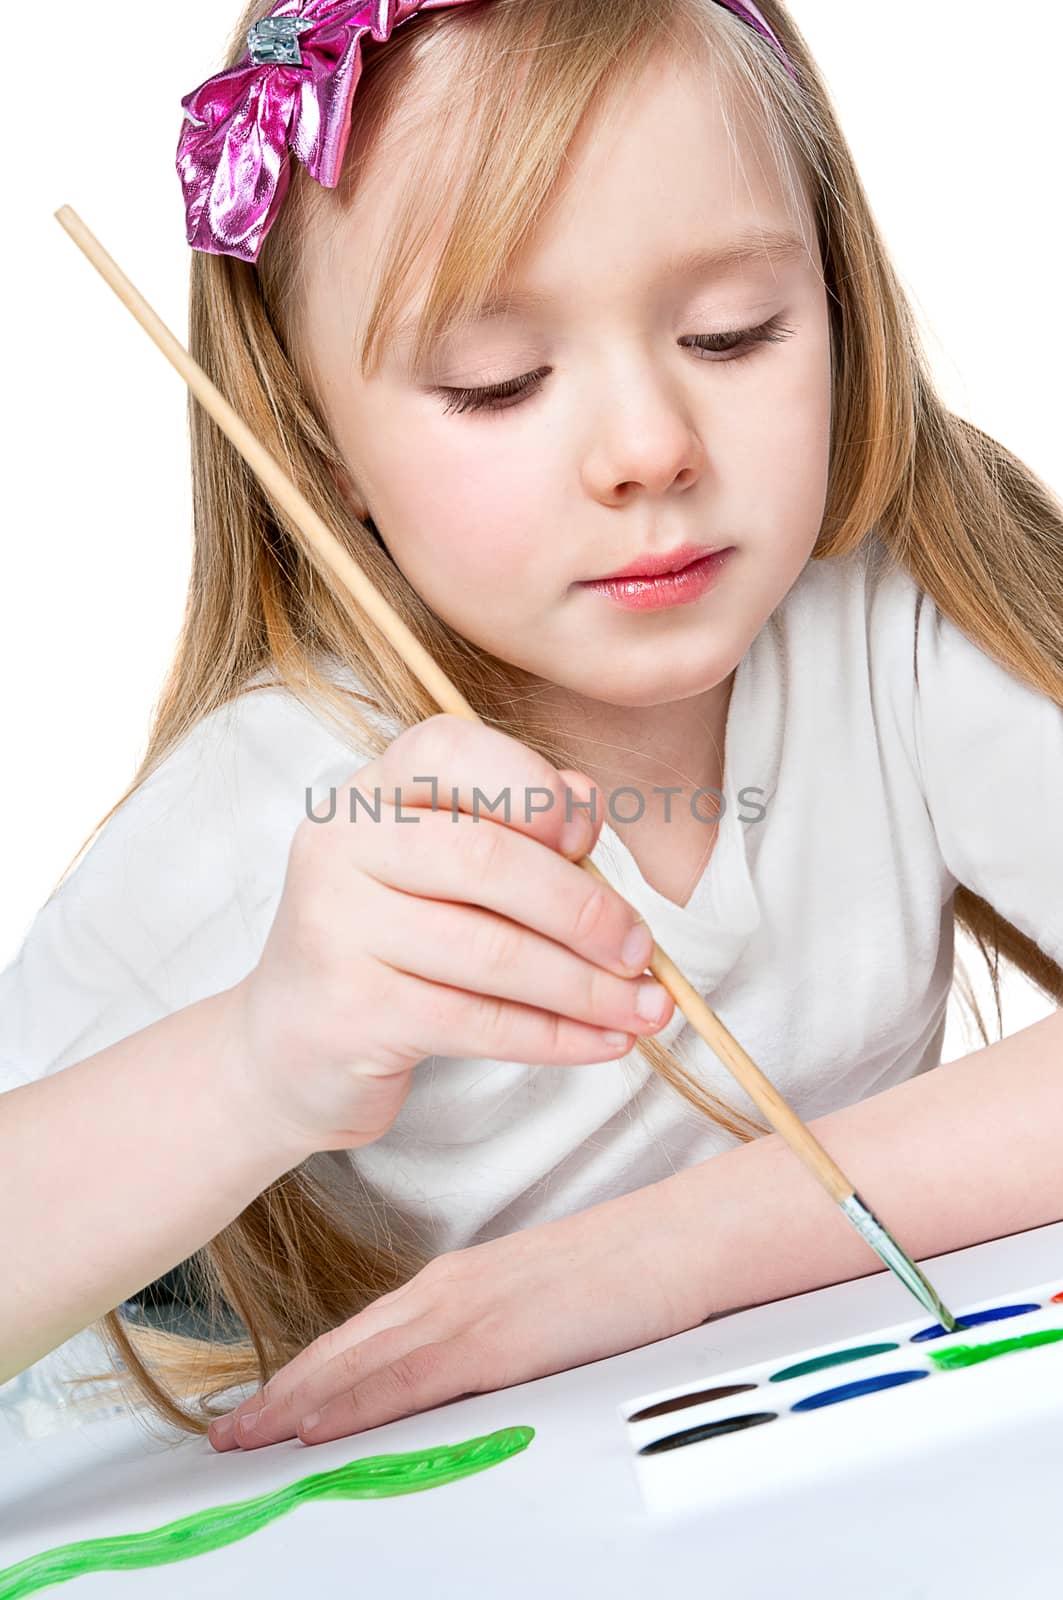 pretty little girl paints with a brush on paper